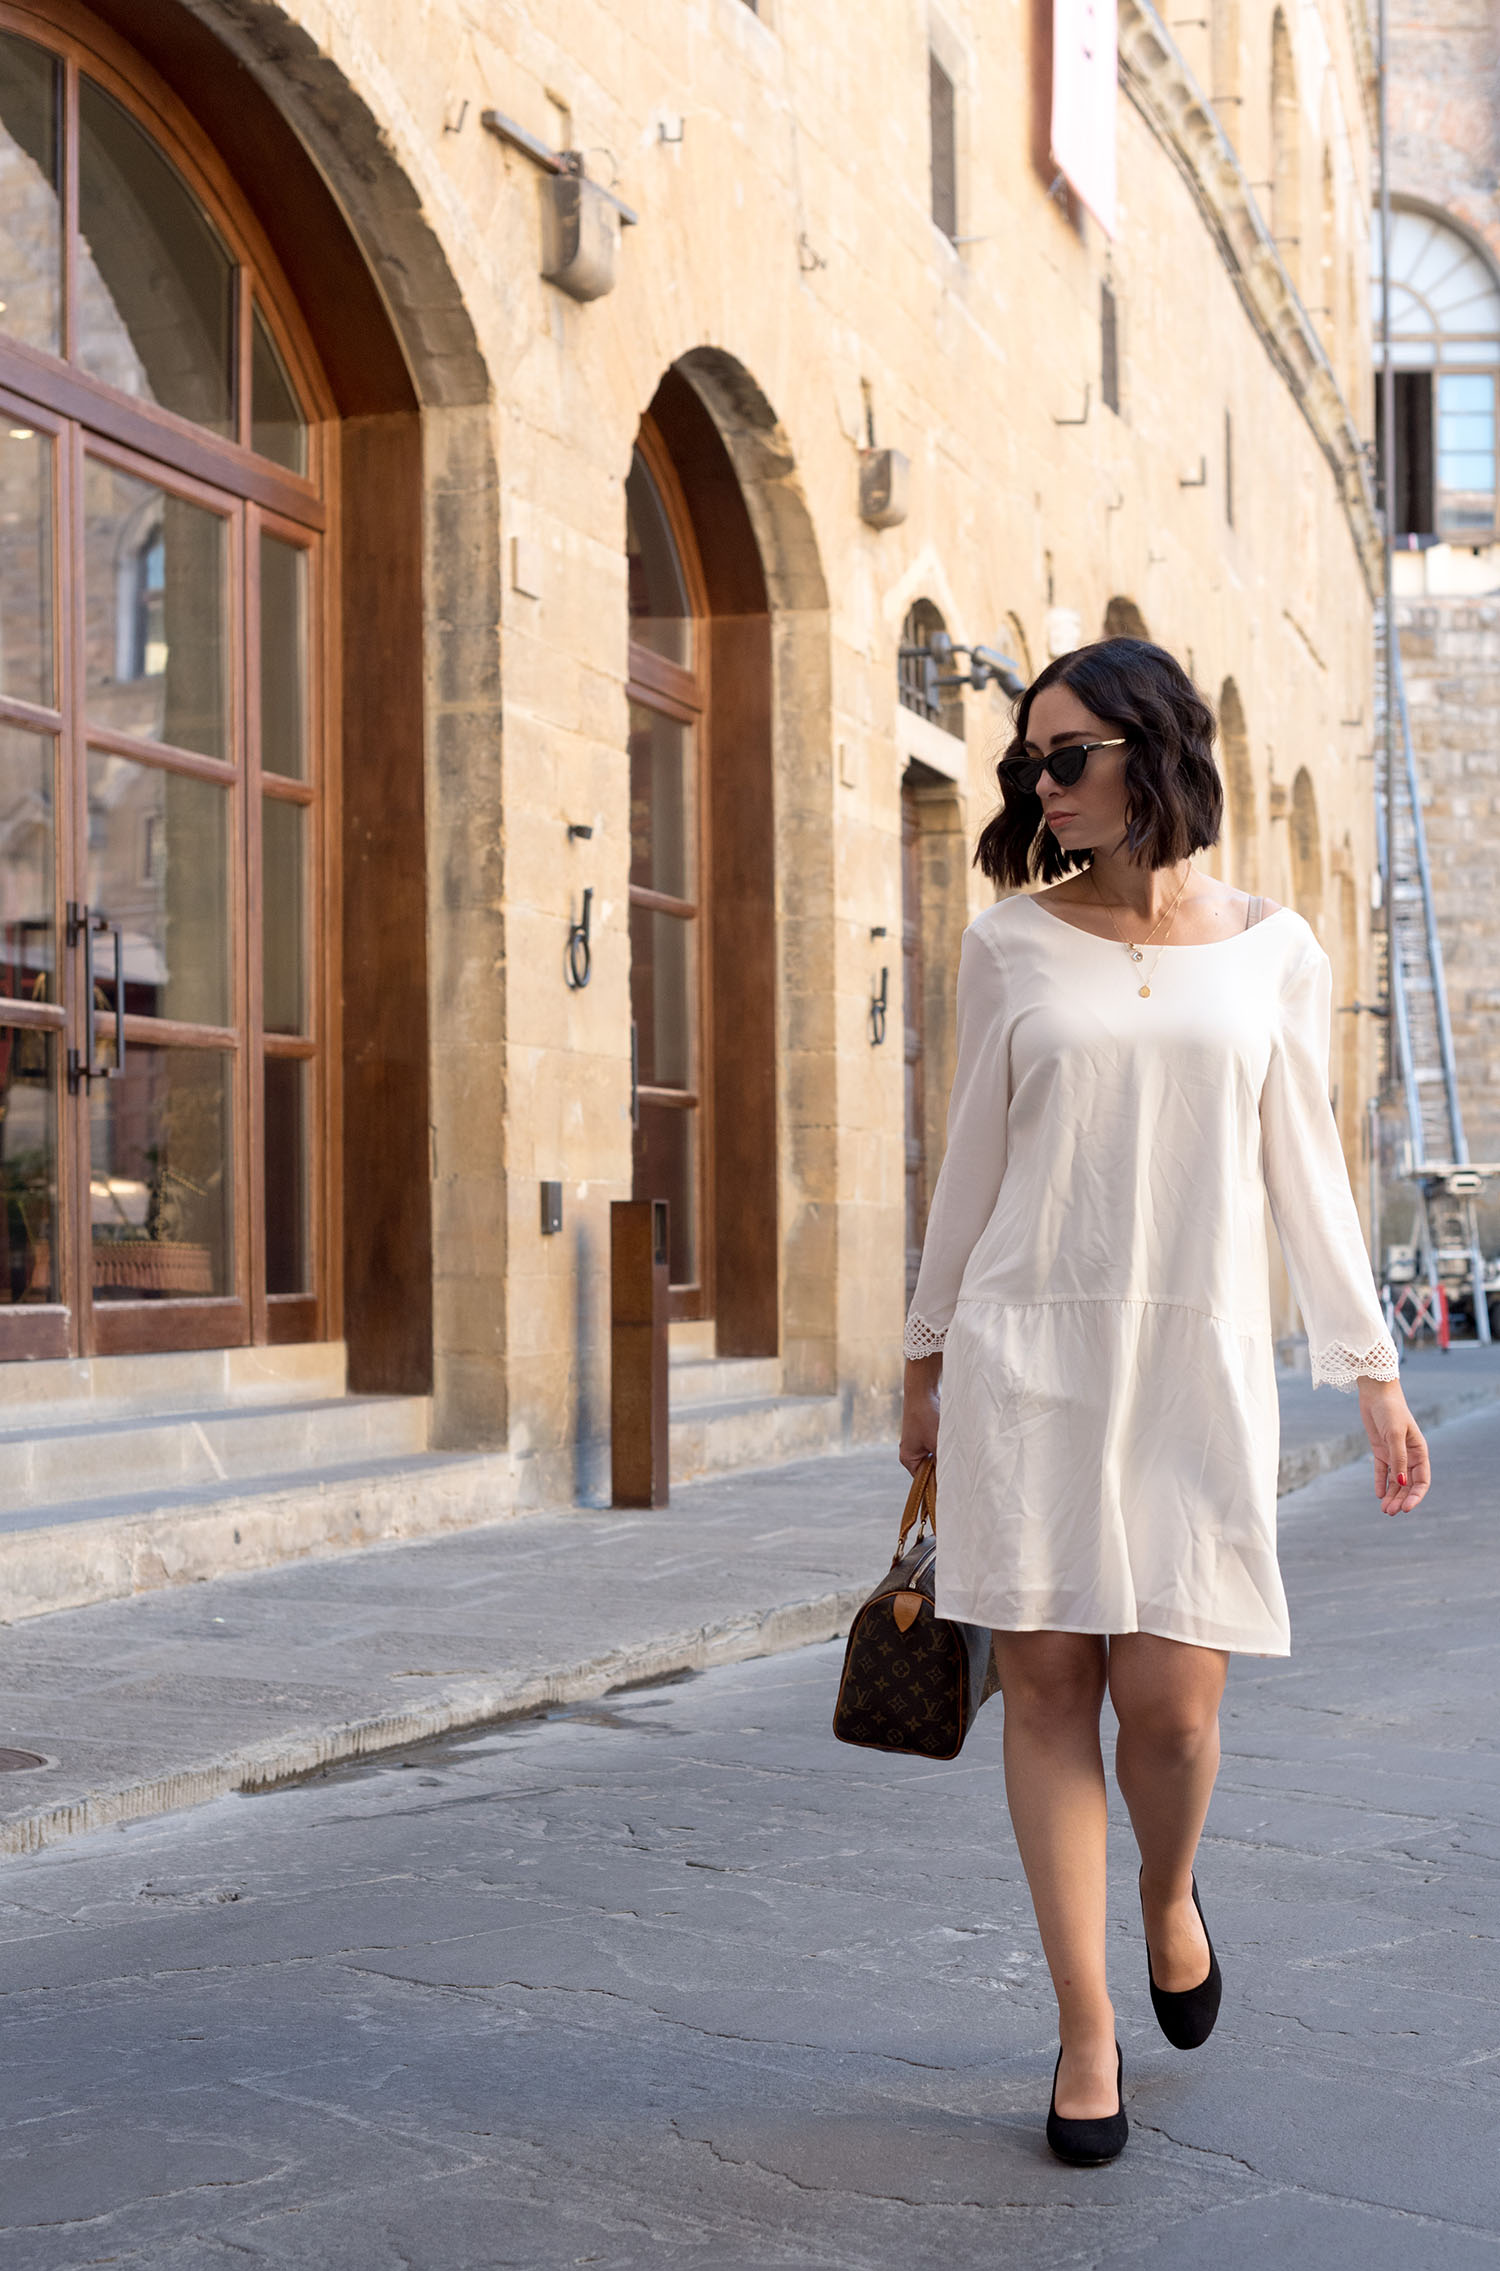 Top Canadian fashion blogger Cee Fardoe of Coco & Vera walks outside Gucci Garden in Florence, Italy, wearing a Sezane white silk dress and H&M block heels